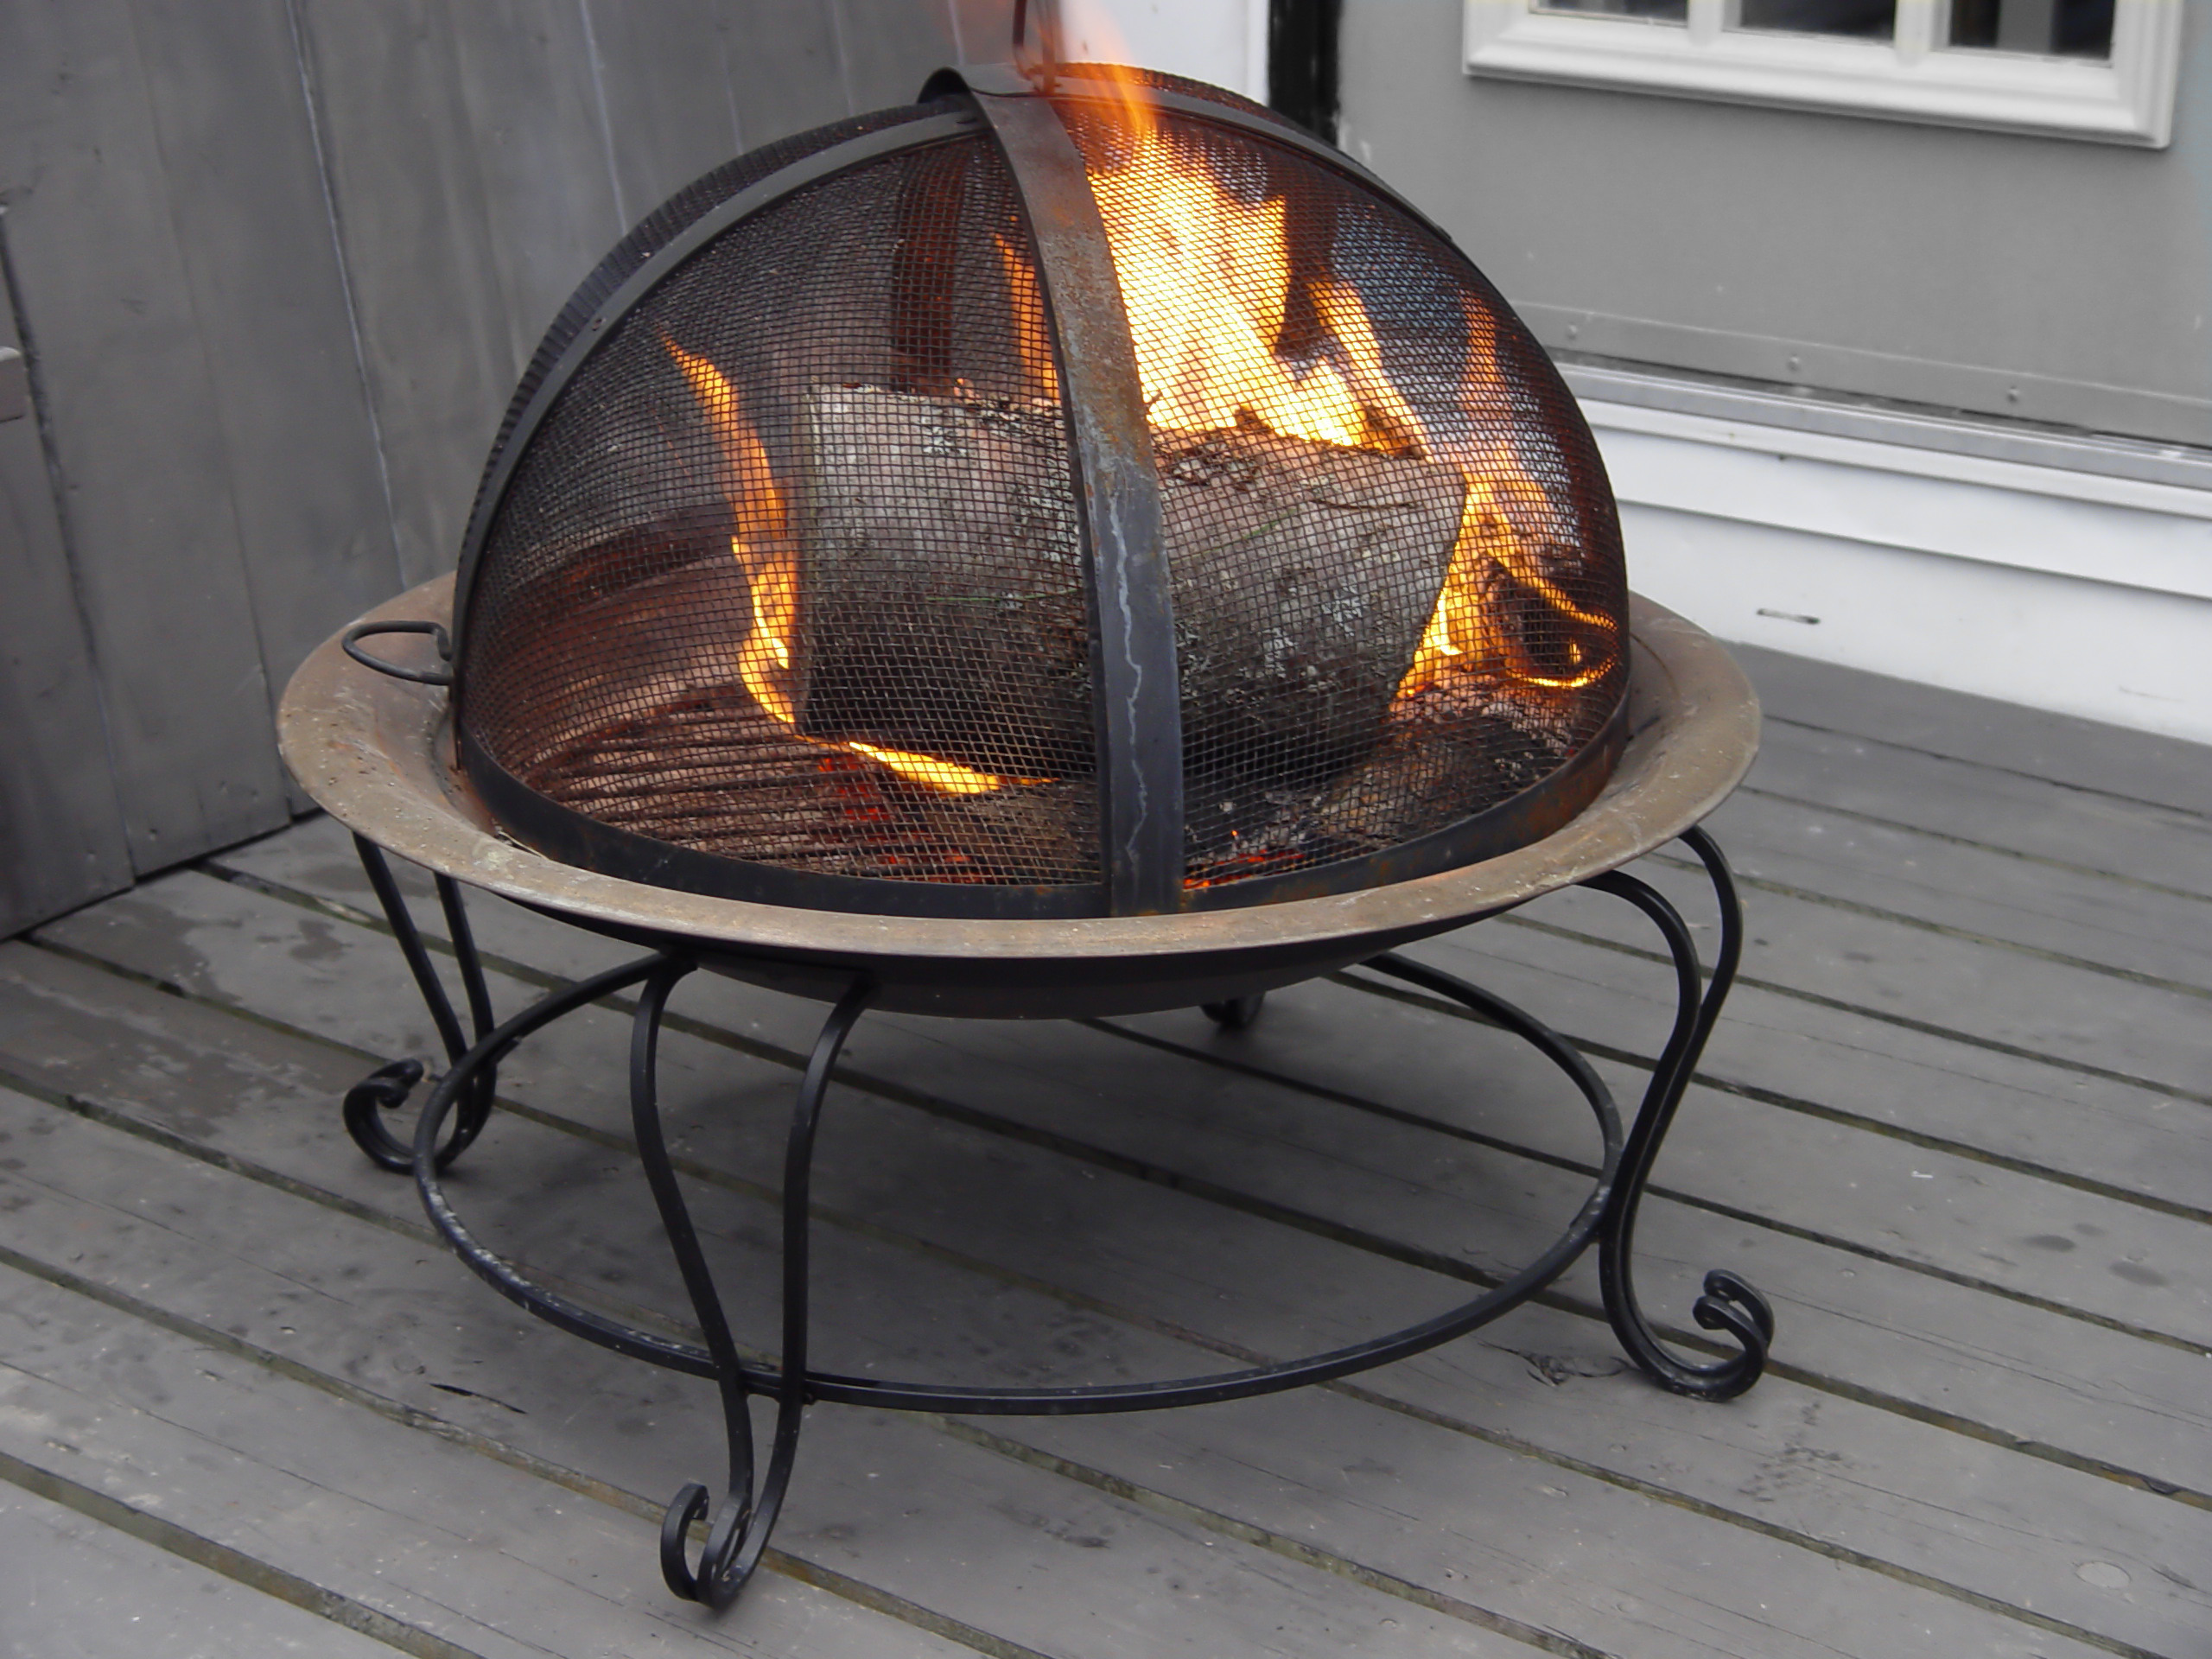 How Do You Fireproof A Timber Deck, How To Use Fire Pit On Deck